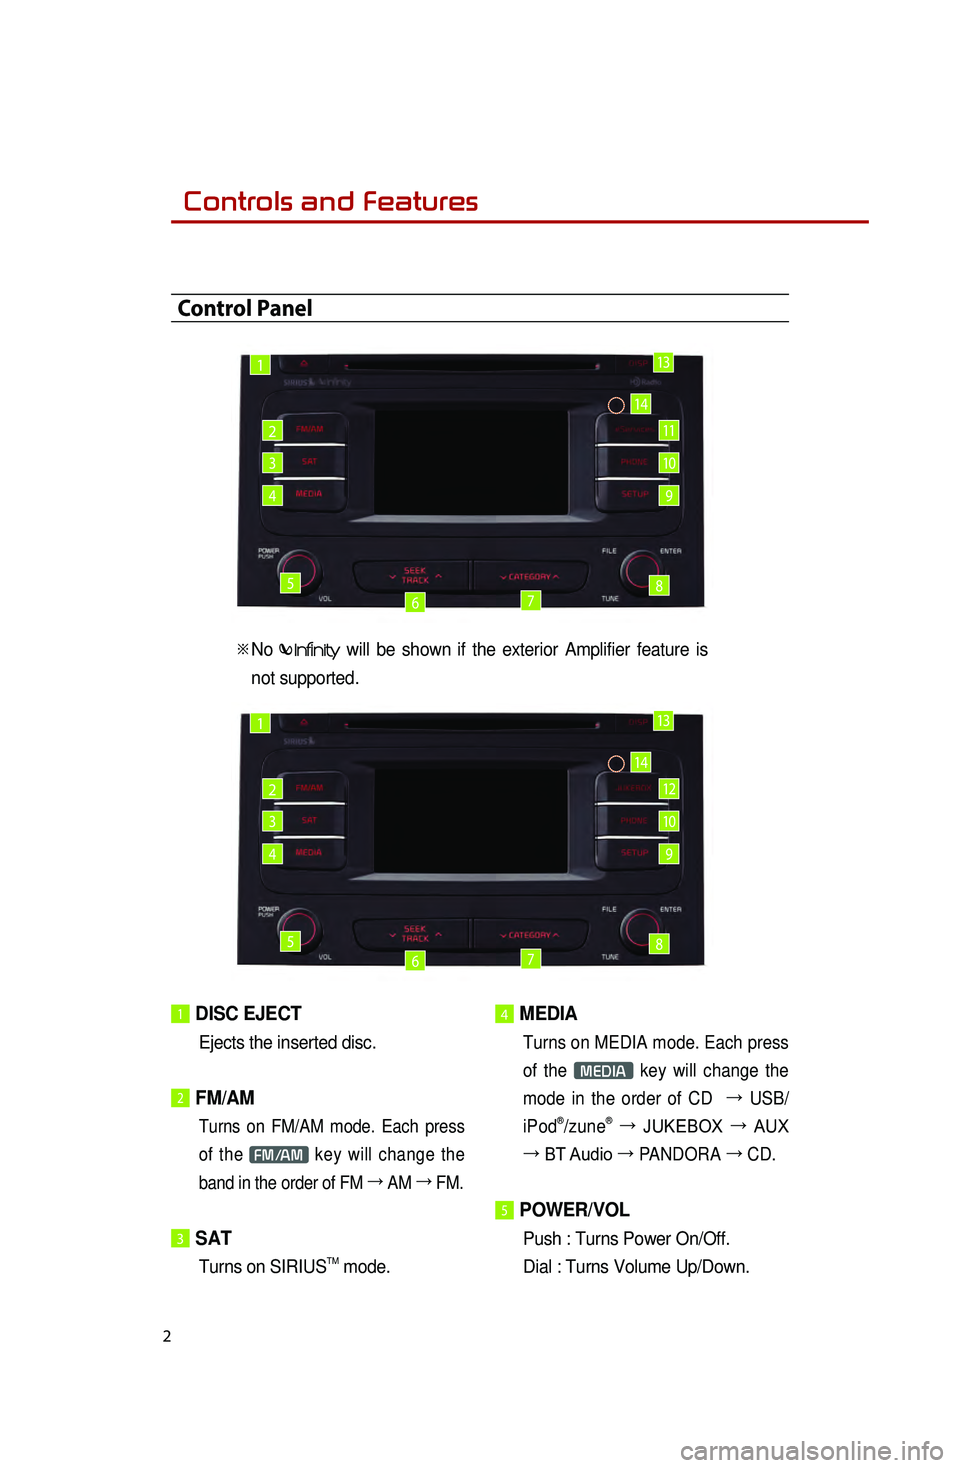 KIA SEDONA 2015  Quick Reference Guide 2
1 DISC  EJECT
Ejects the inserted disc.
 
2 FM/AM
 Turns on FM/AM mode. Each press 
of the 
FM/AM key will change the 
band in the order of FM  →
 AM  →
 FM.
3 SAT
Turns on SIRIUSTM  mode. 
4 ME